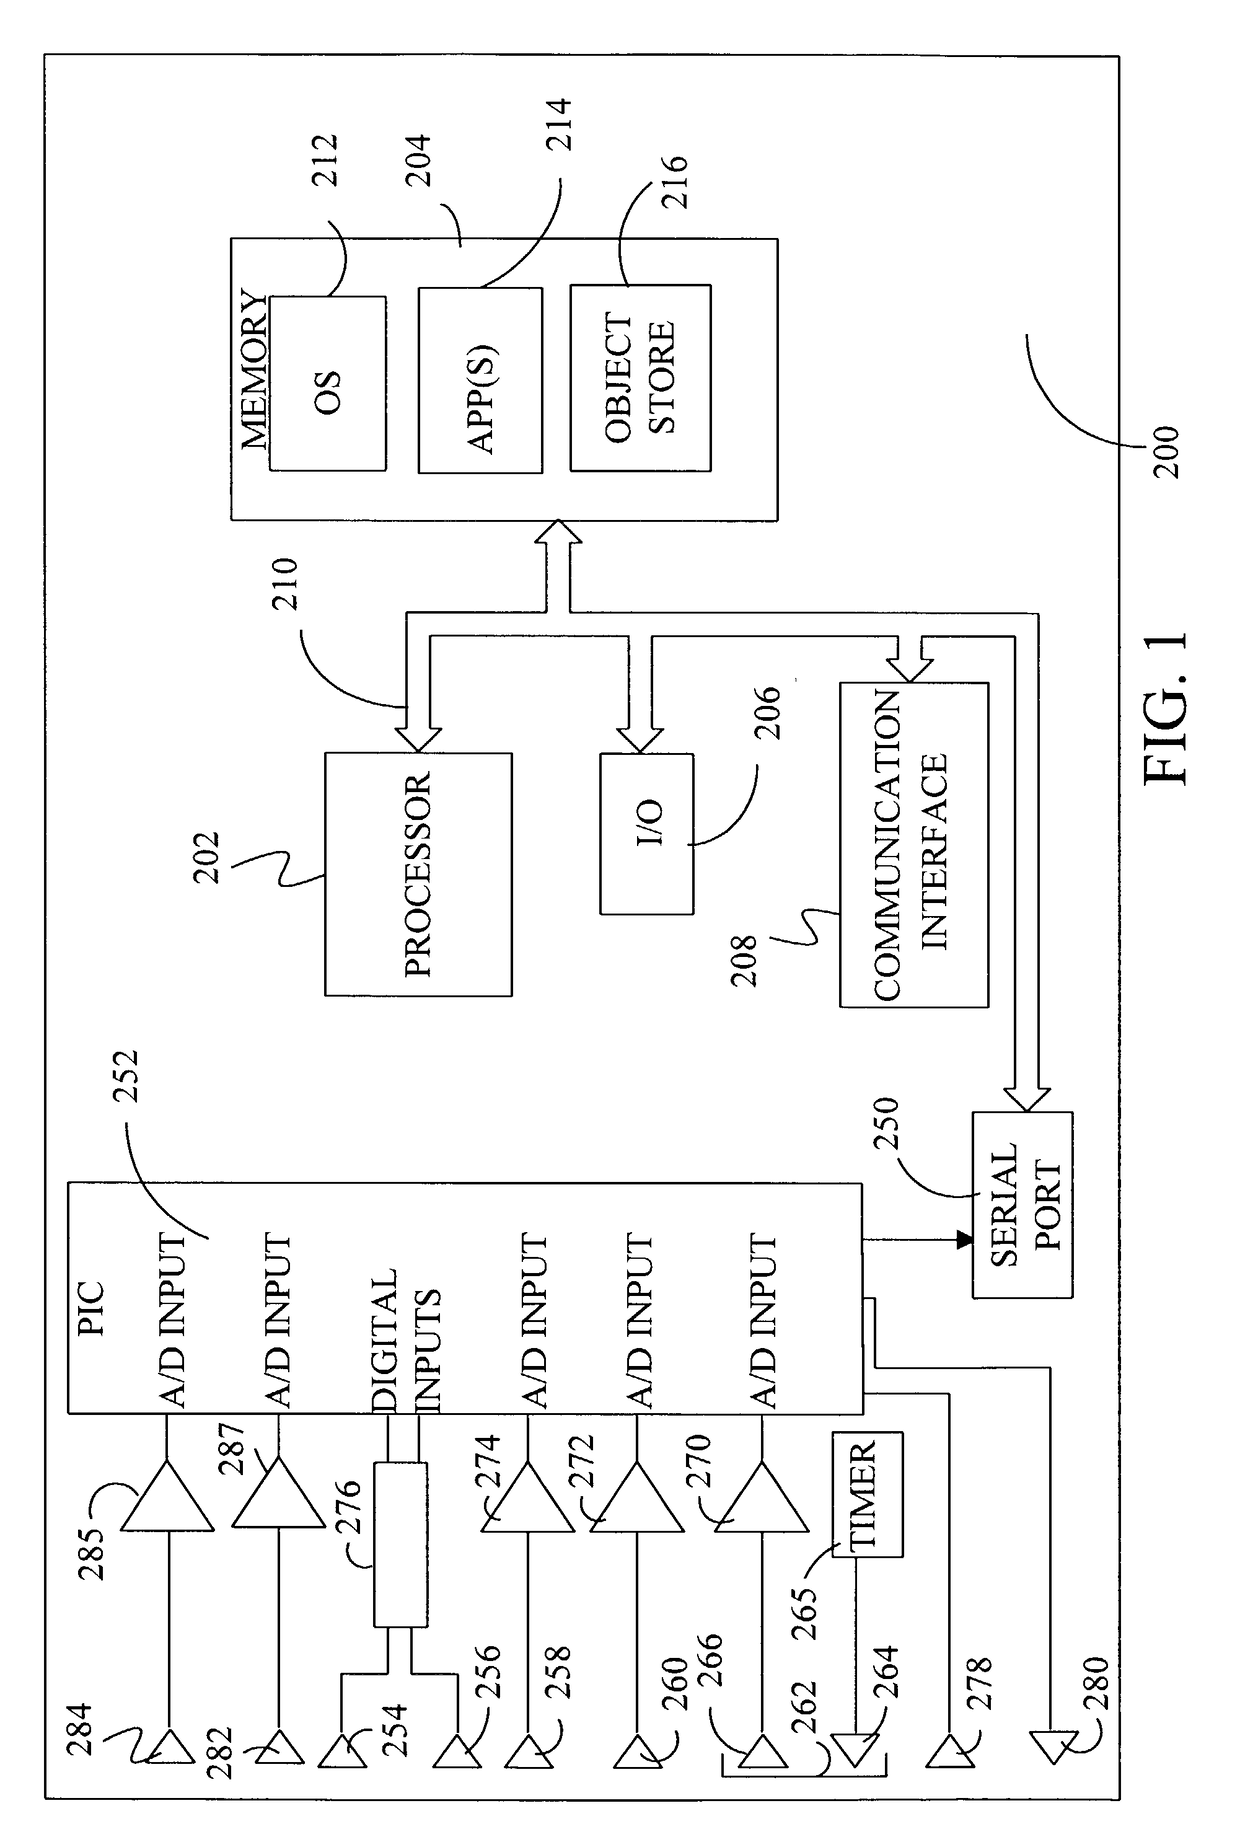 Method and apparatus using multiple sensors in a device with a display